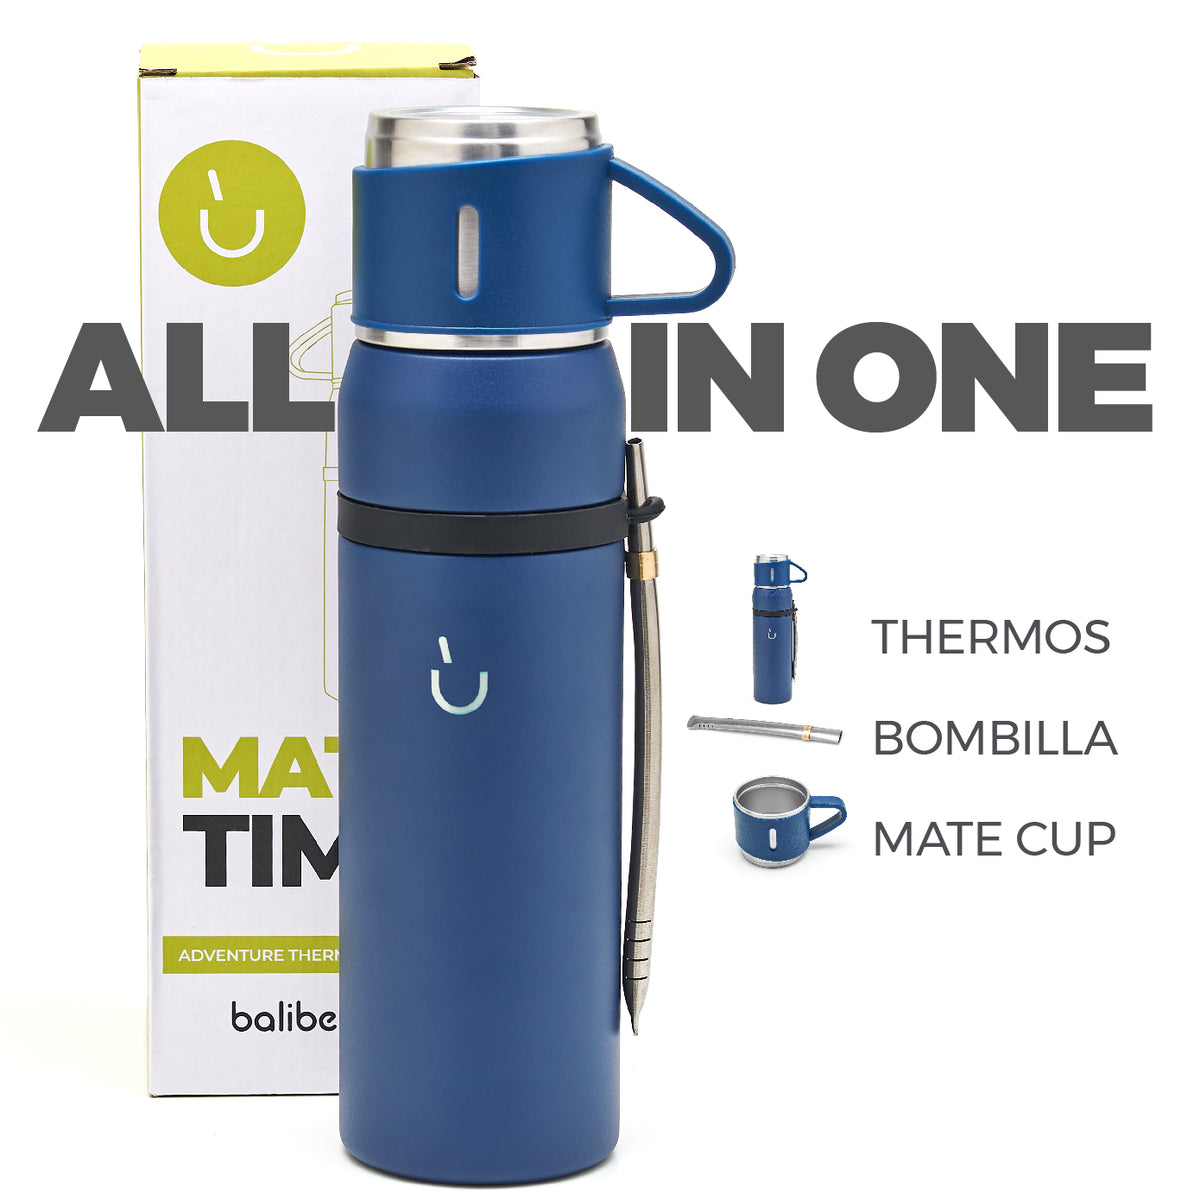 ▷ BUY YERBA MATE THERMOS │ Ideal Flasks for Yerba Mate